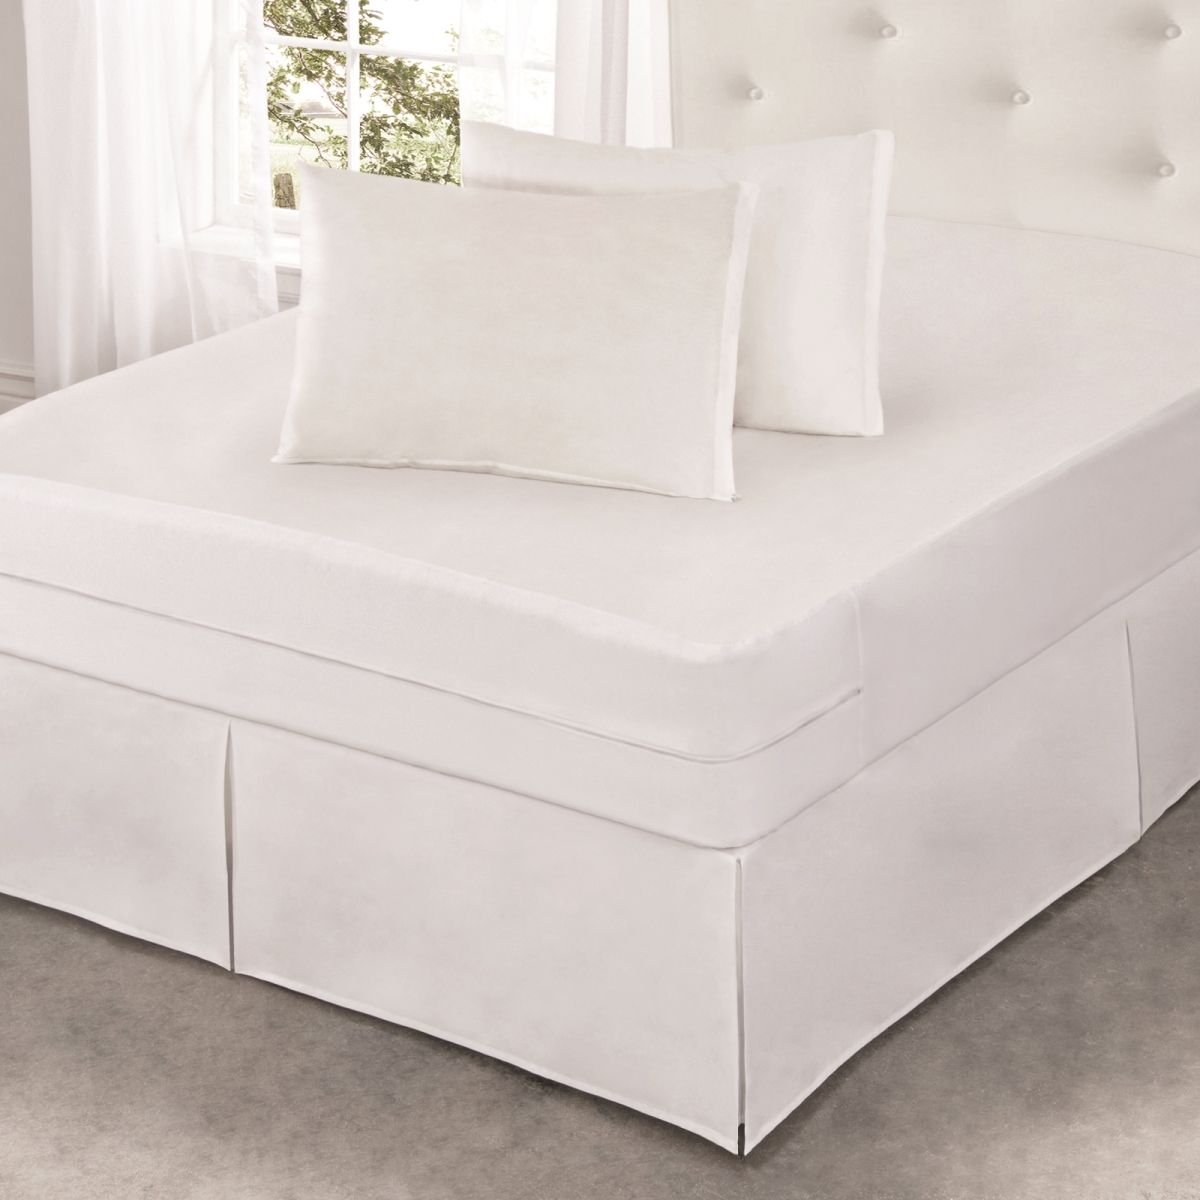 All172xxwhit05 Cool Bamboo Mattress Protector With Bed Bug Blocker, White - California King Size